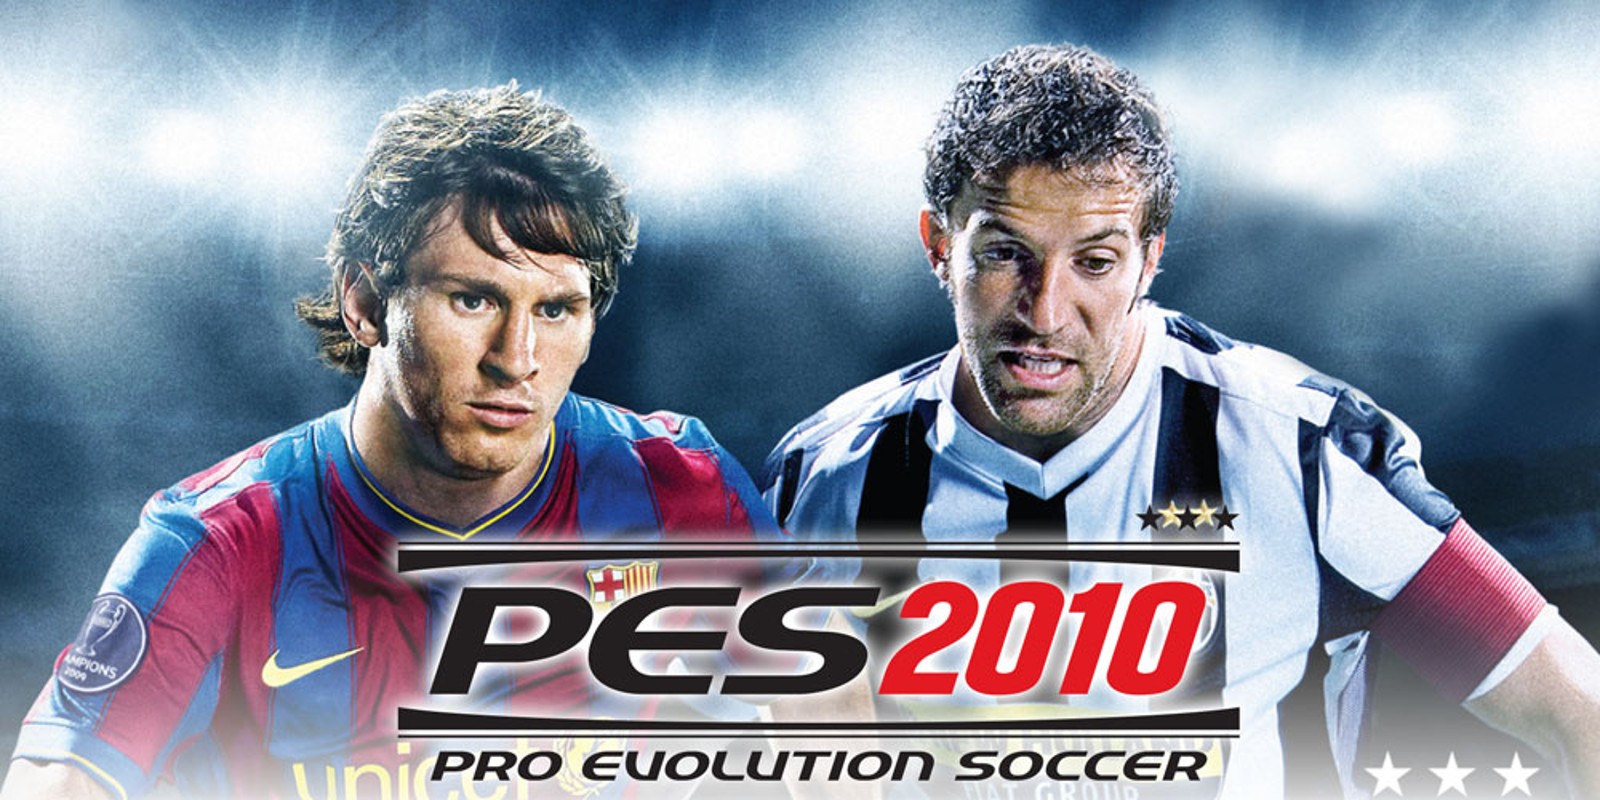 si_wii_pes2010_image1600w